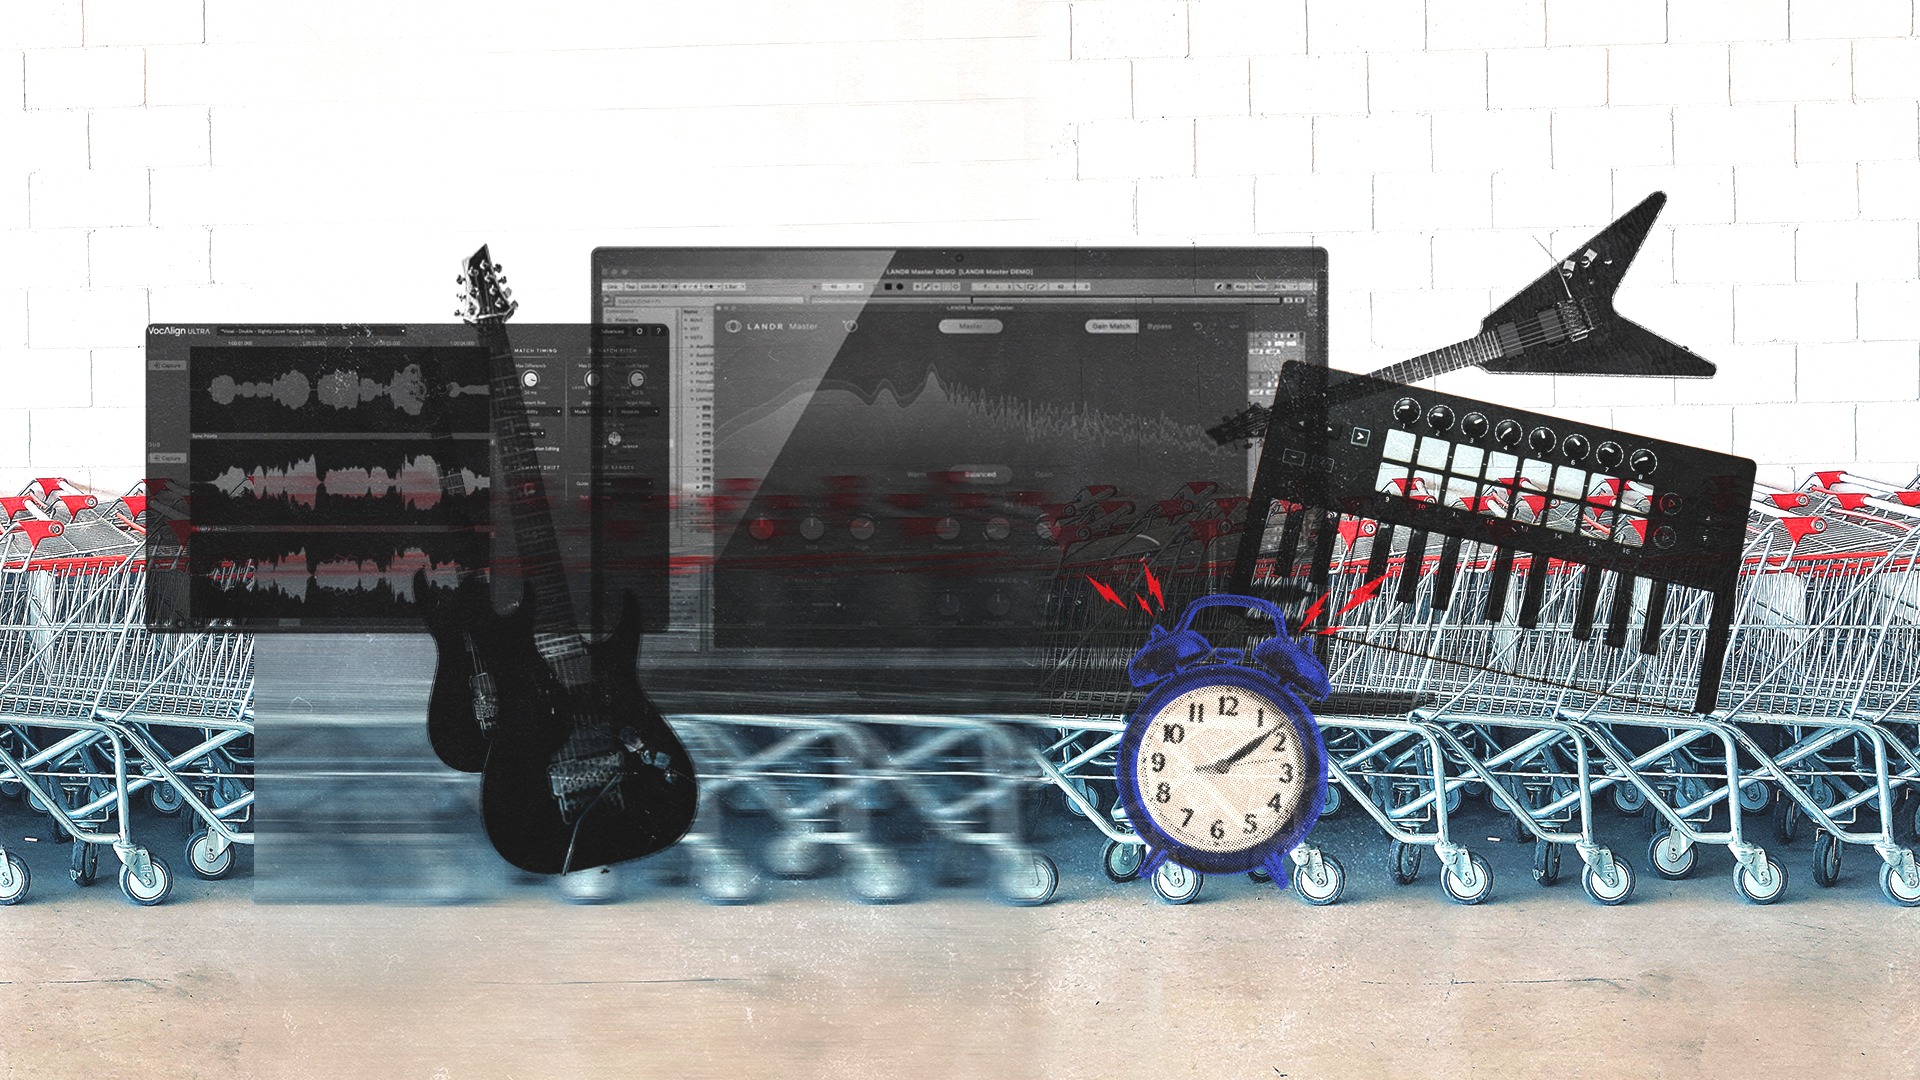 monochrome image of vocalign ultra, the landr mastering plugin and an mpc over shopping carts, guitars and an alarm clock